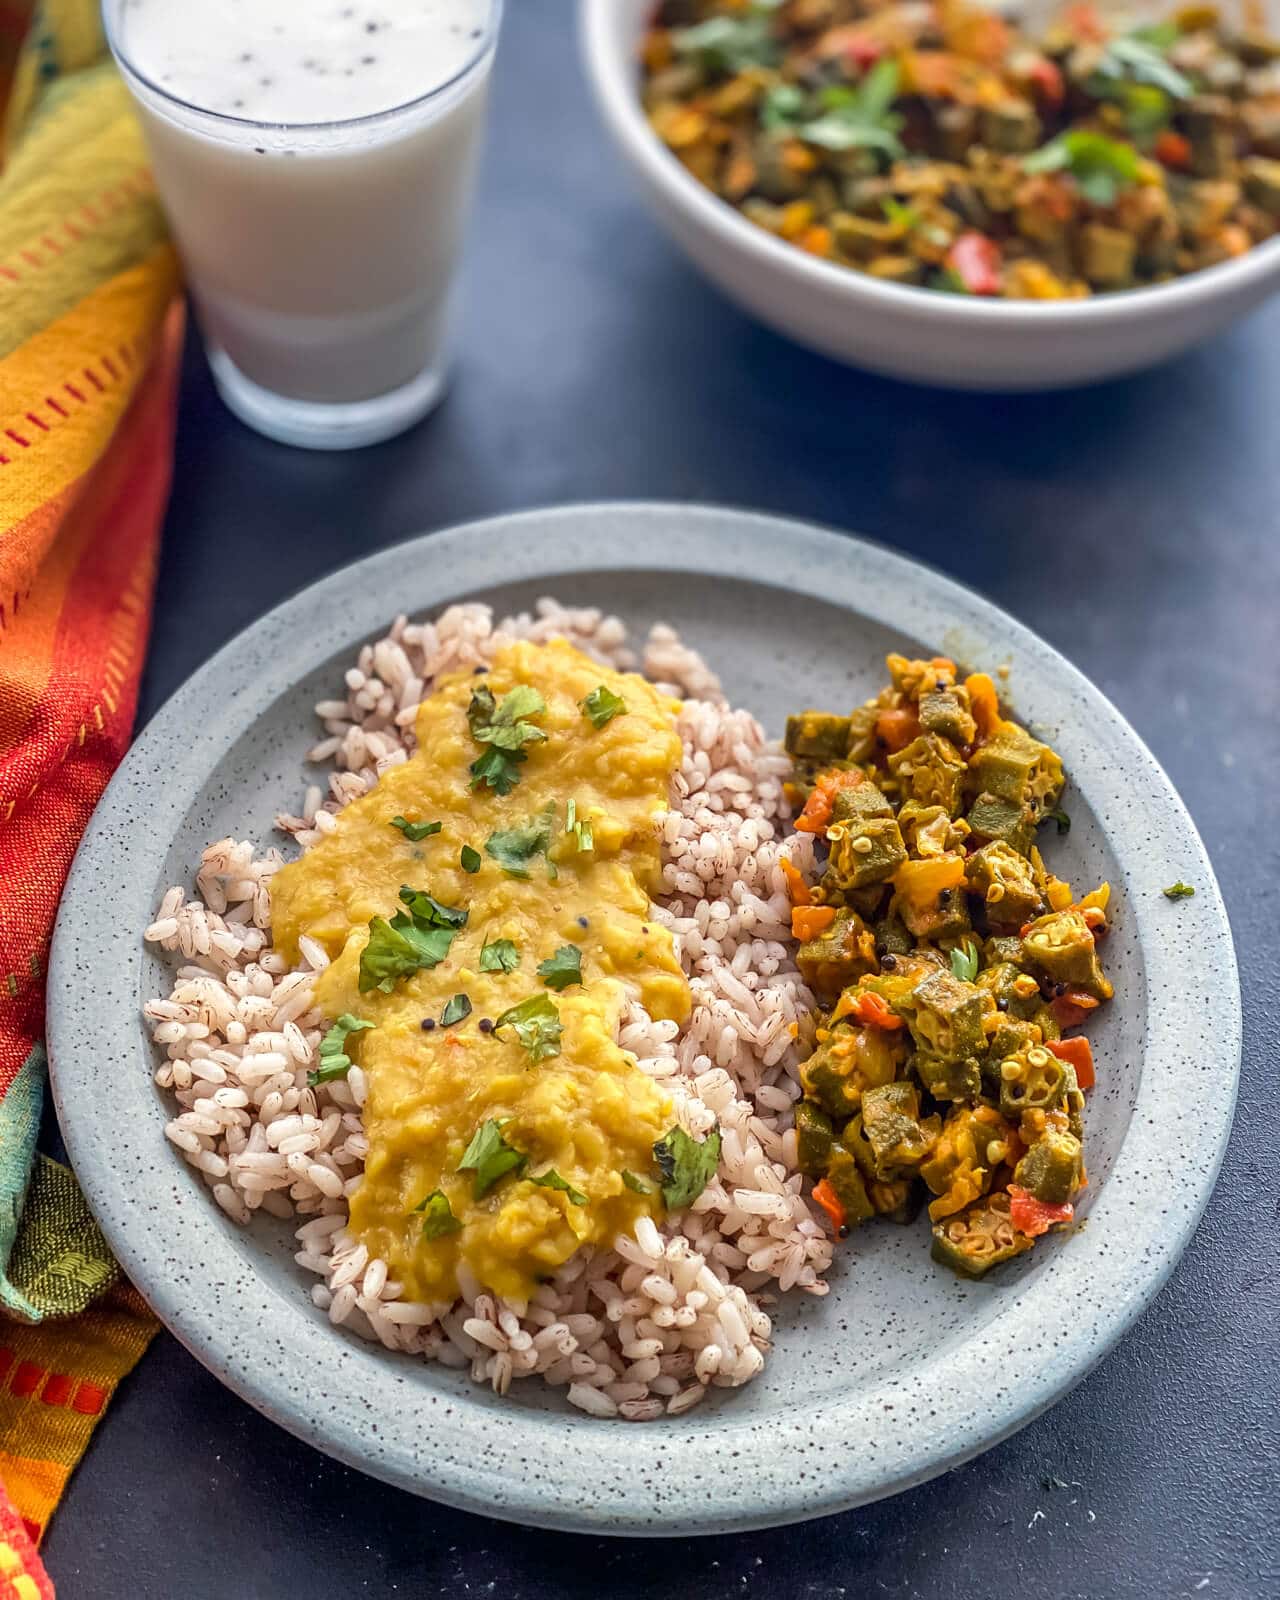 Bhindi subzi served with rice and dal in a grey plate